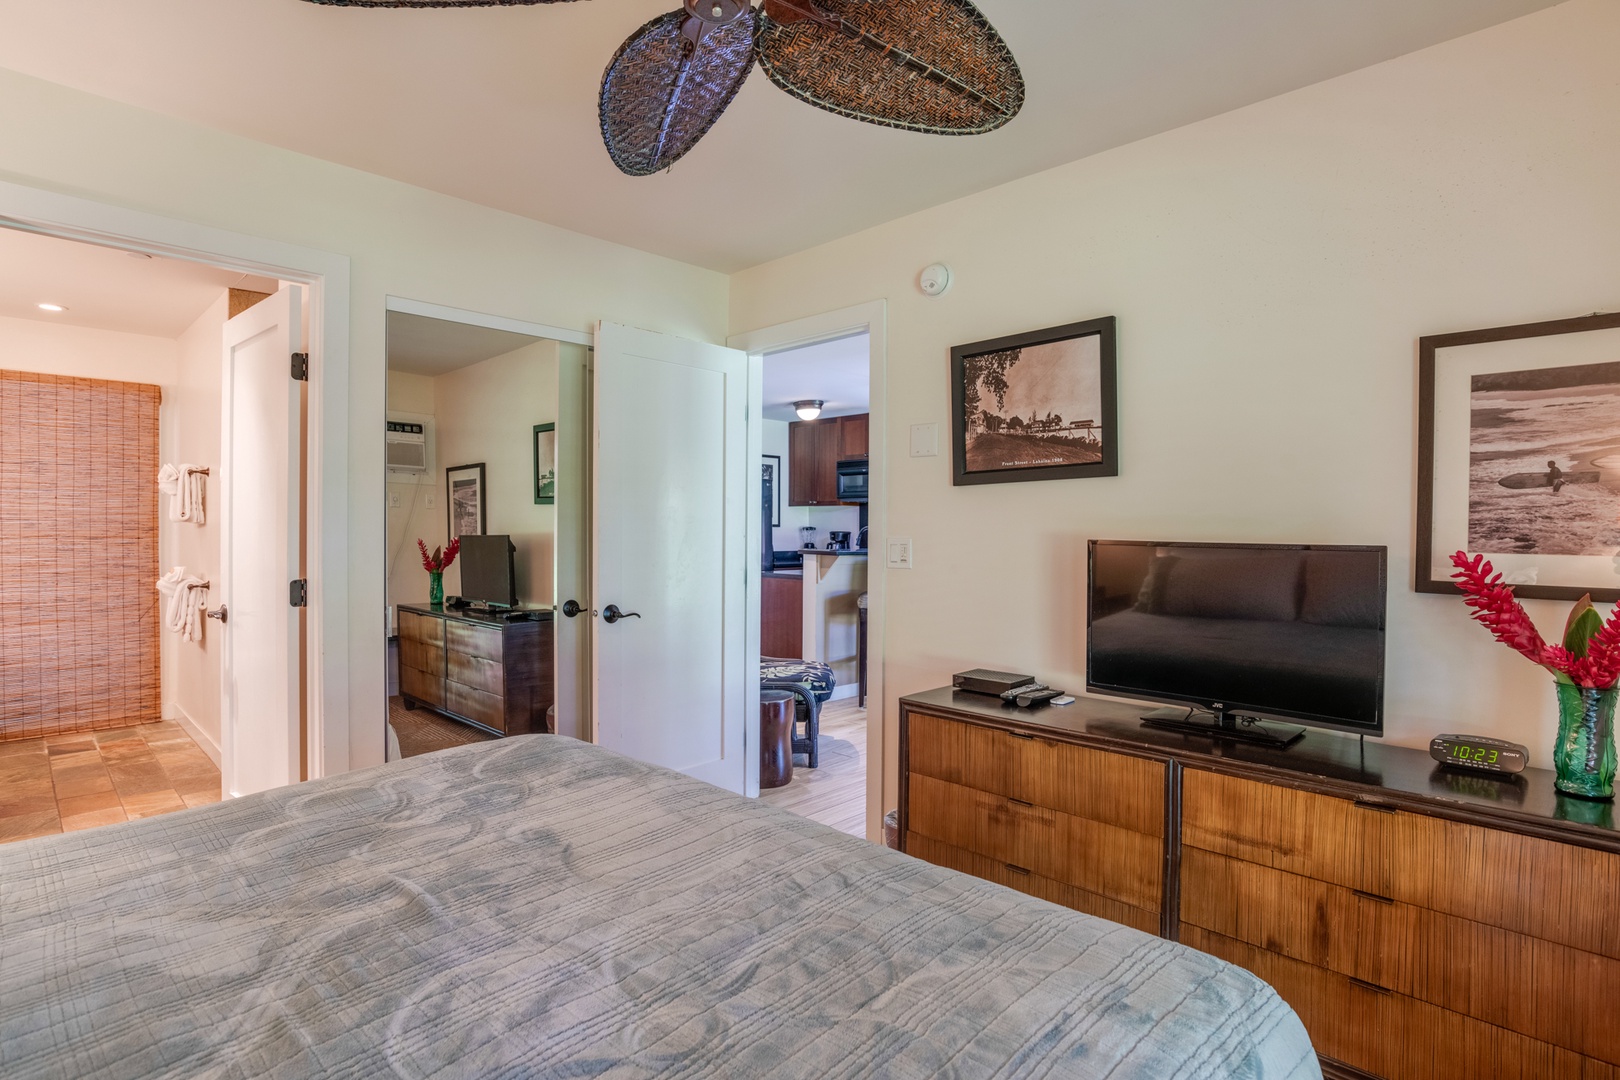 Lahaina Vacation Rentals, Aina Nalu D103 - This bedroom is also equipped with a flat screen TV and ensuite bath